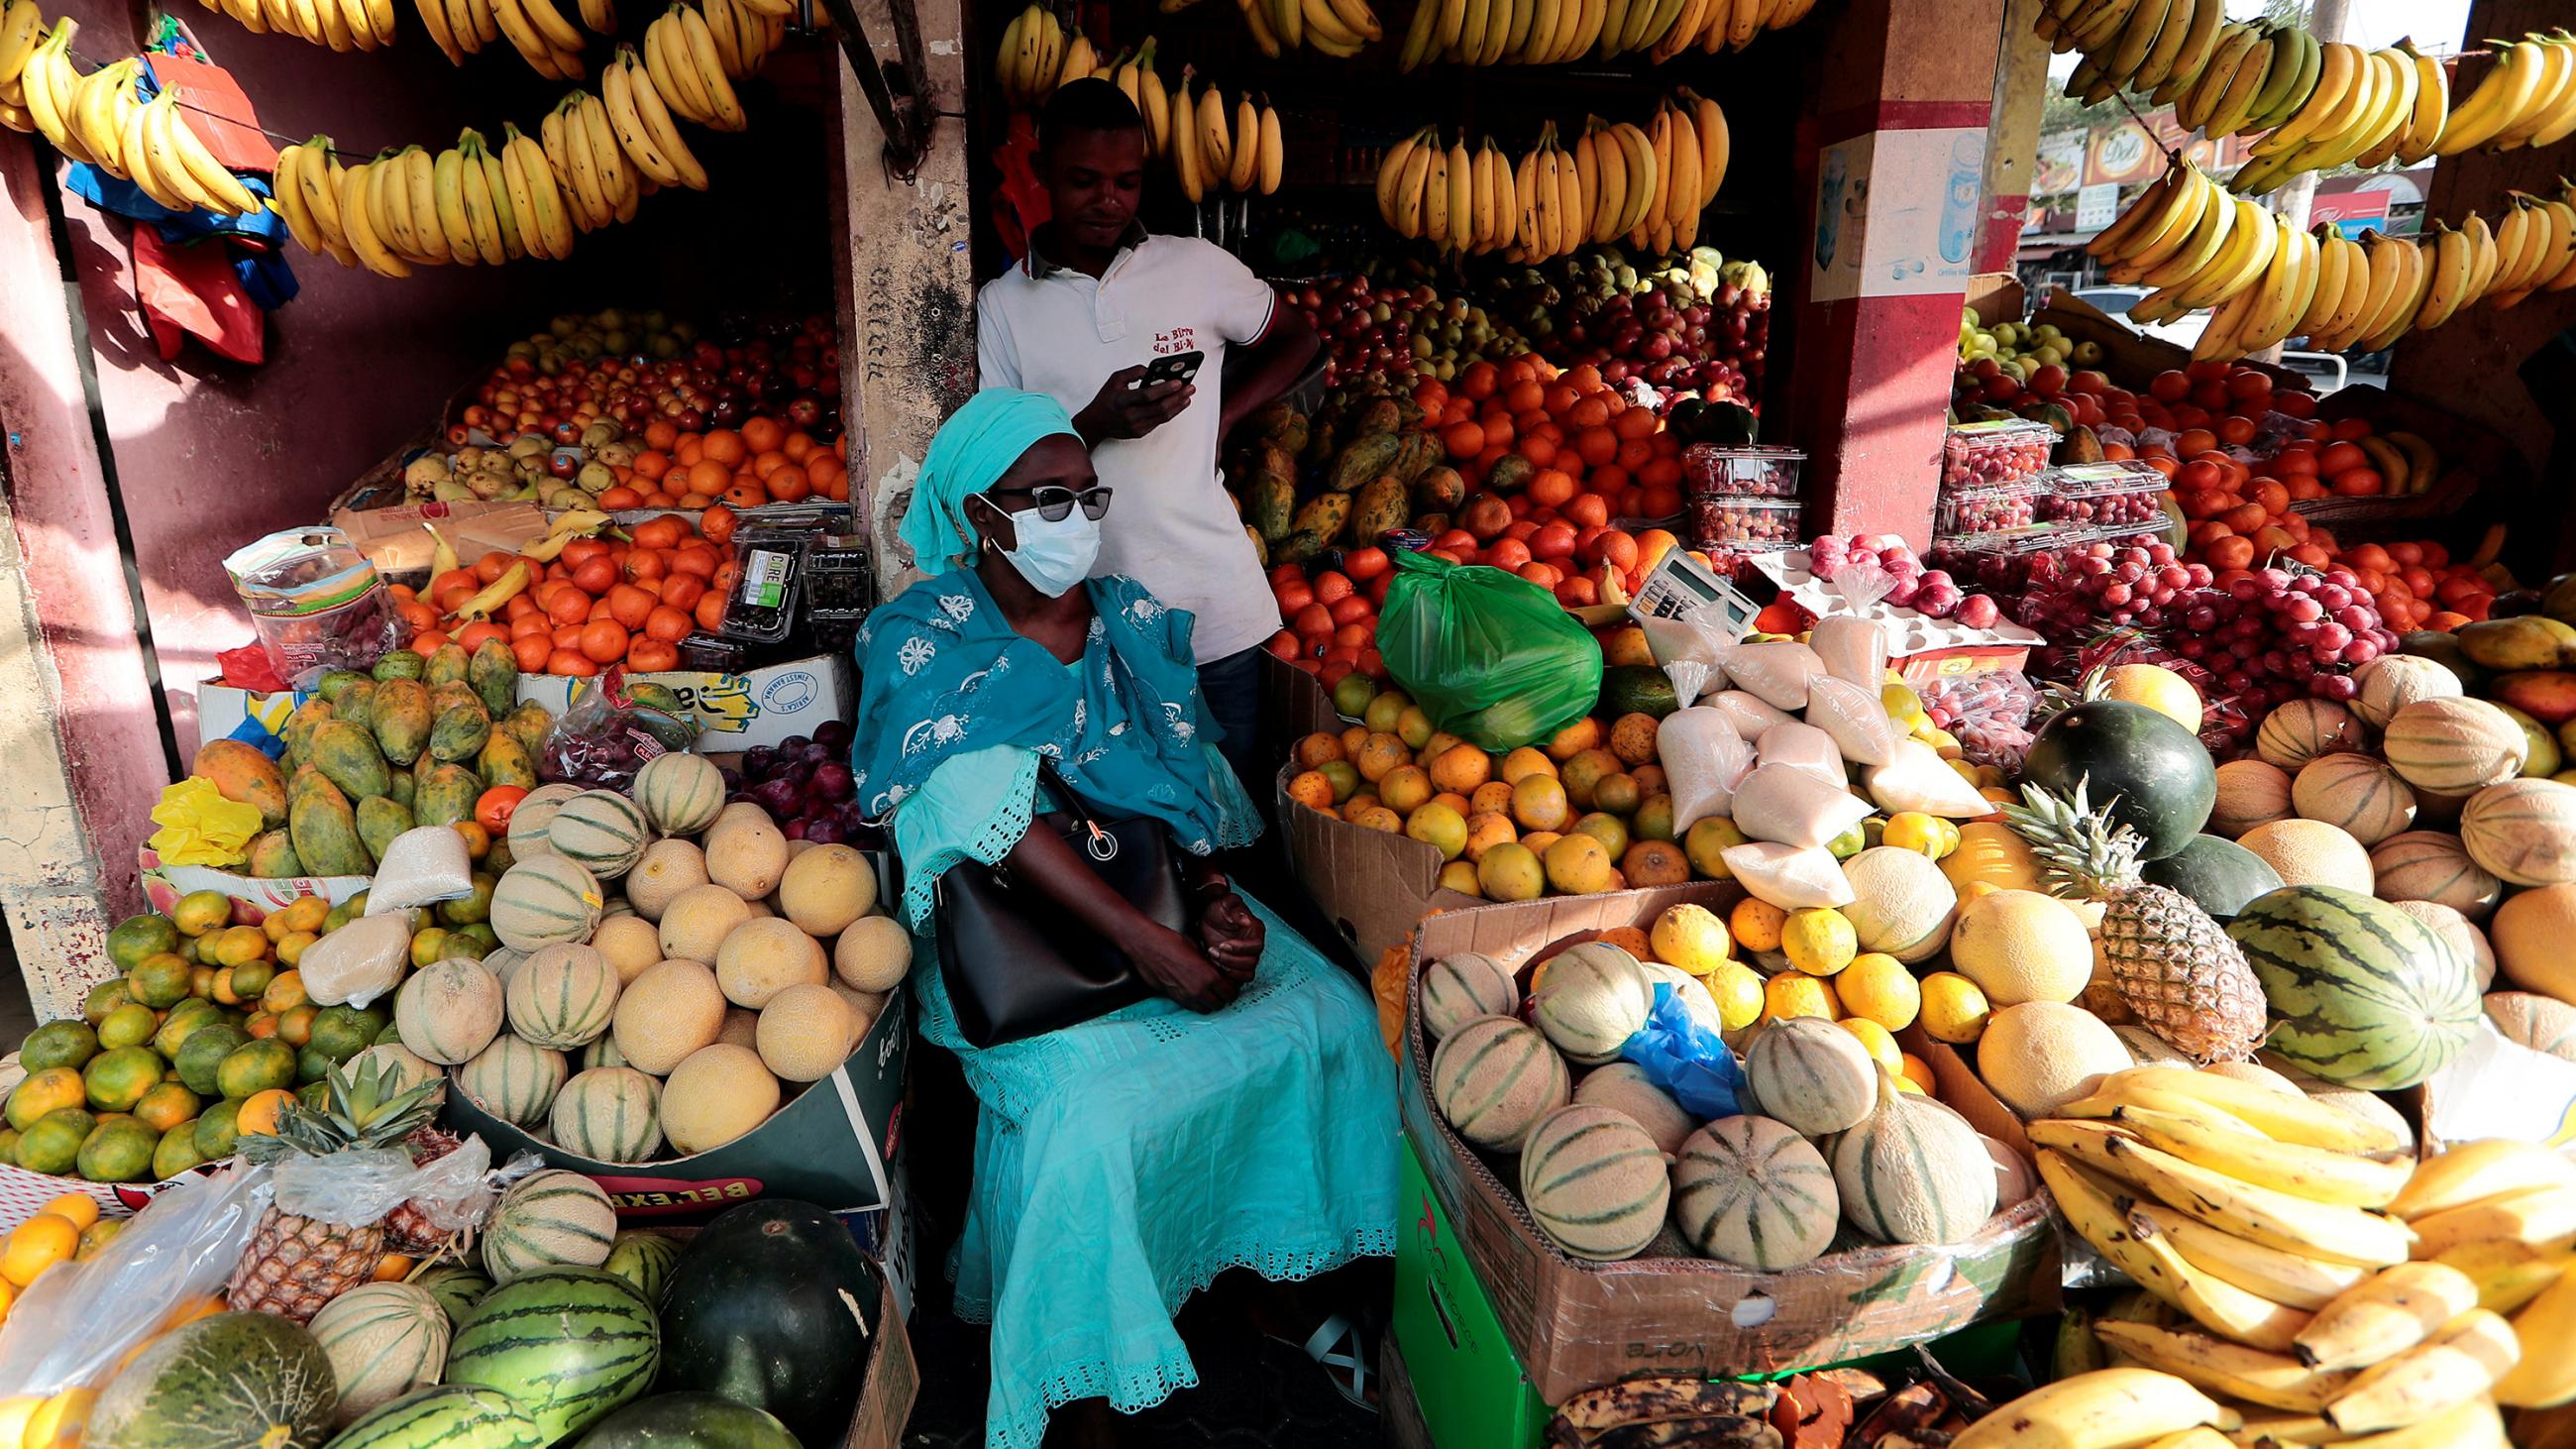 The photo shows a woman wearing a mask sitting amid an abundance of fruit in a tiny stand. 